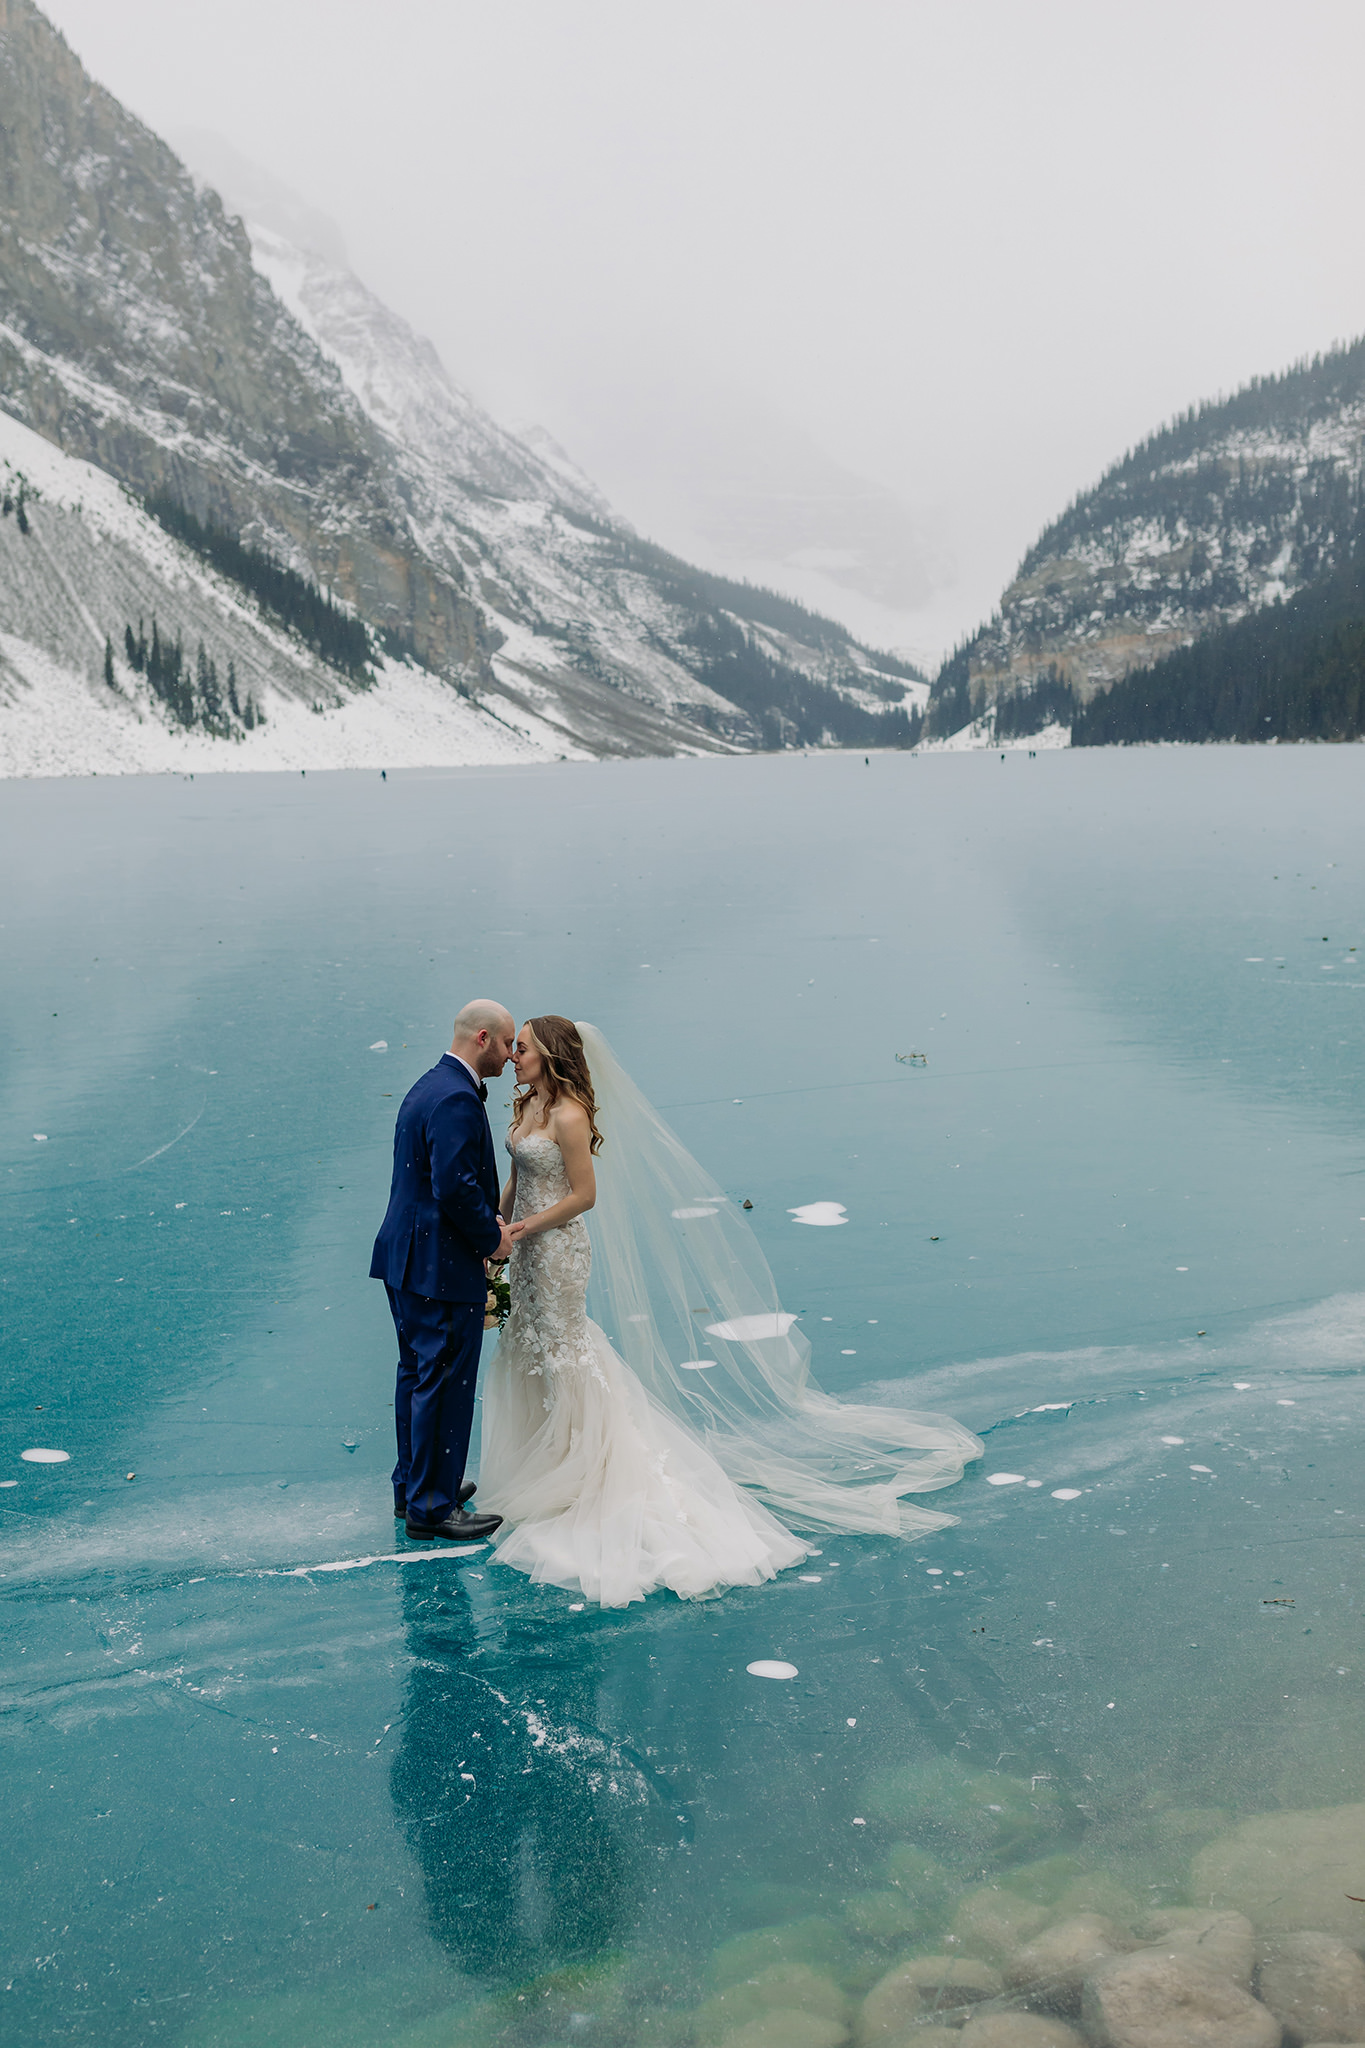 Epic blue ice backdrop for outdoor winter wedding at Lake Louise in the Canadian Rocky Mountains